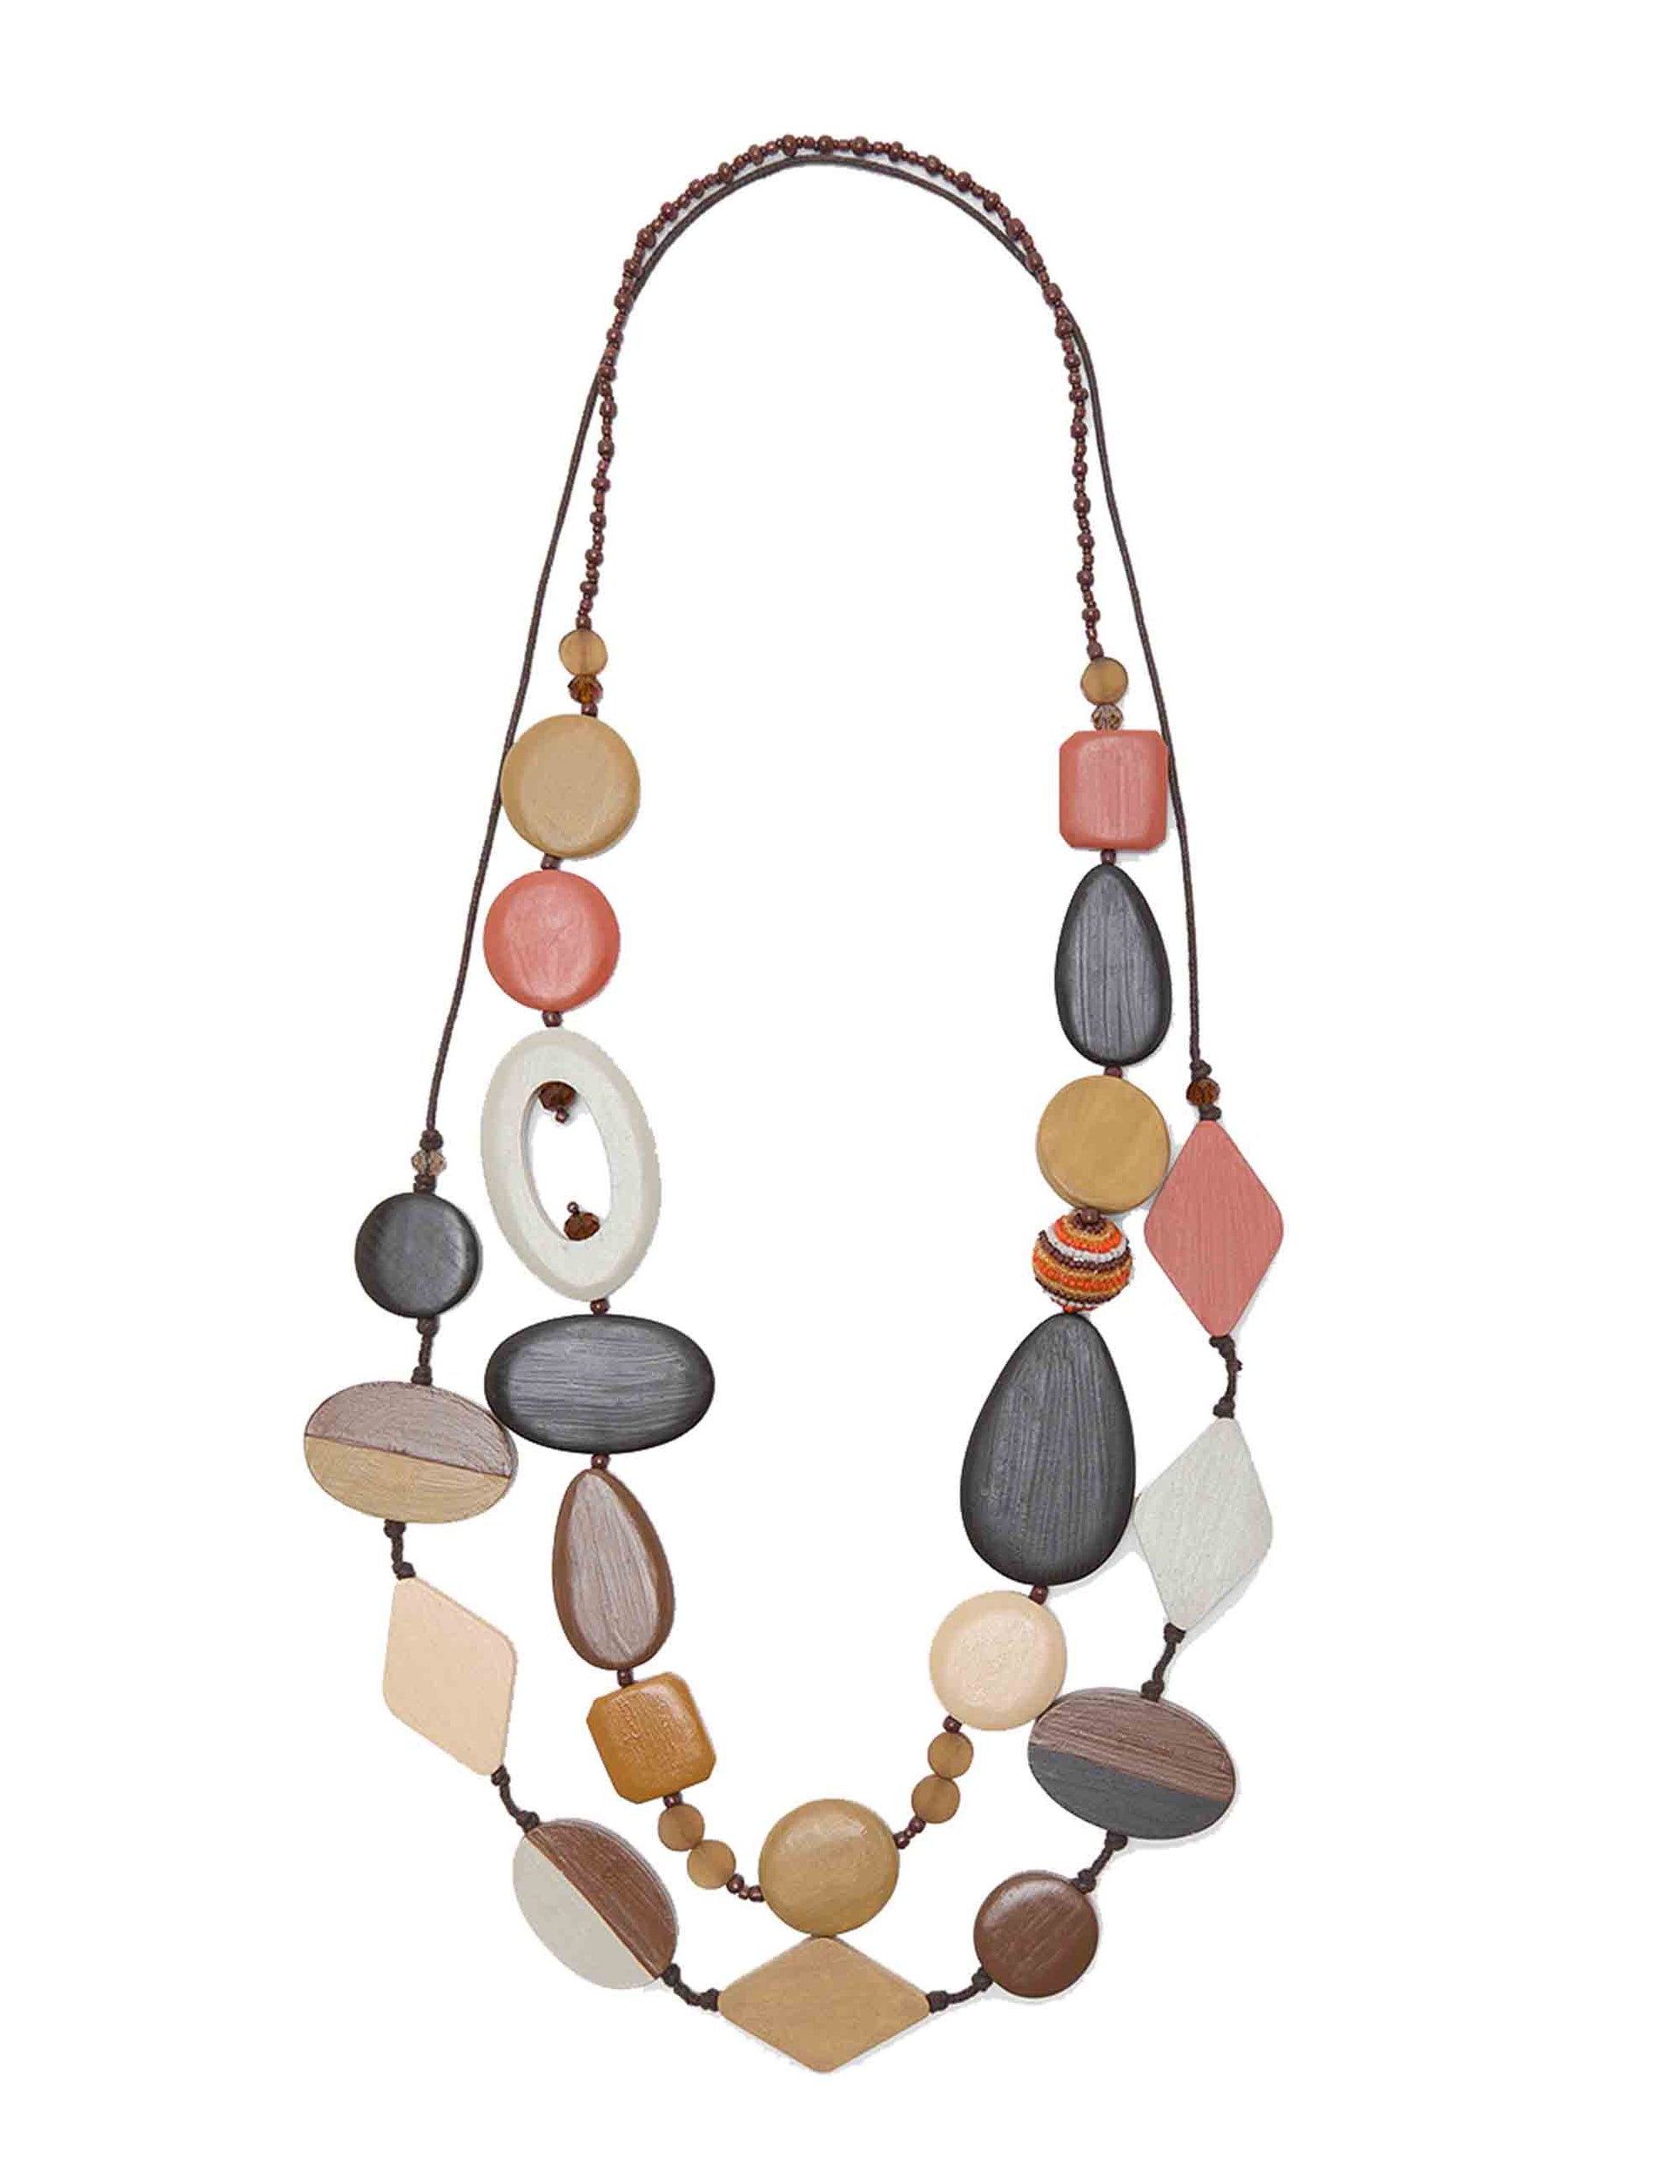 Payful women's necklaces in resin and beige wood